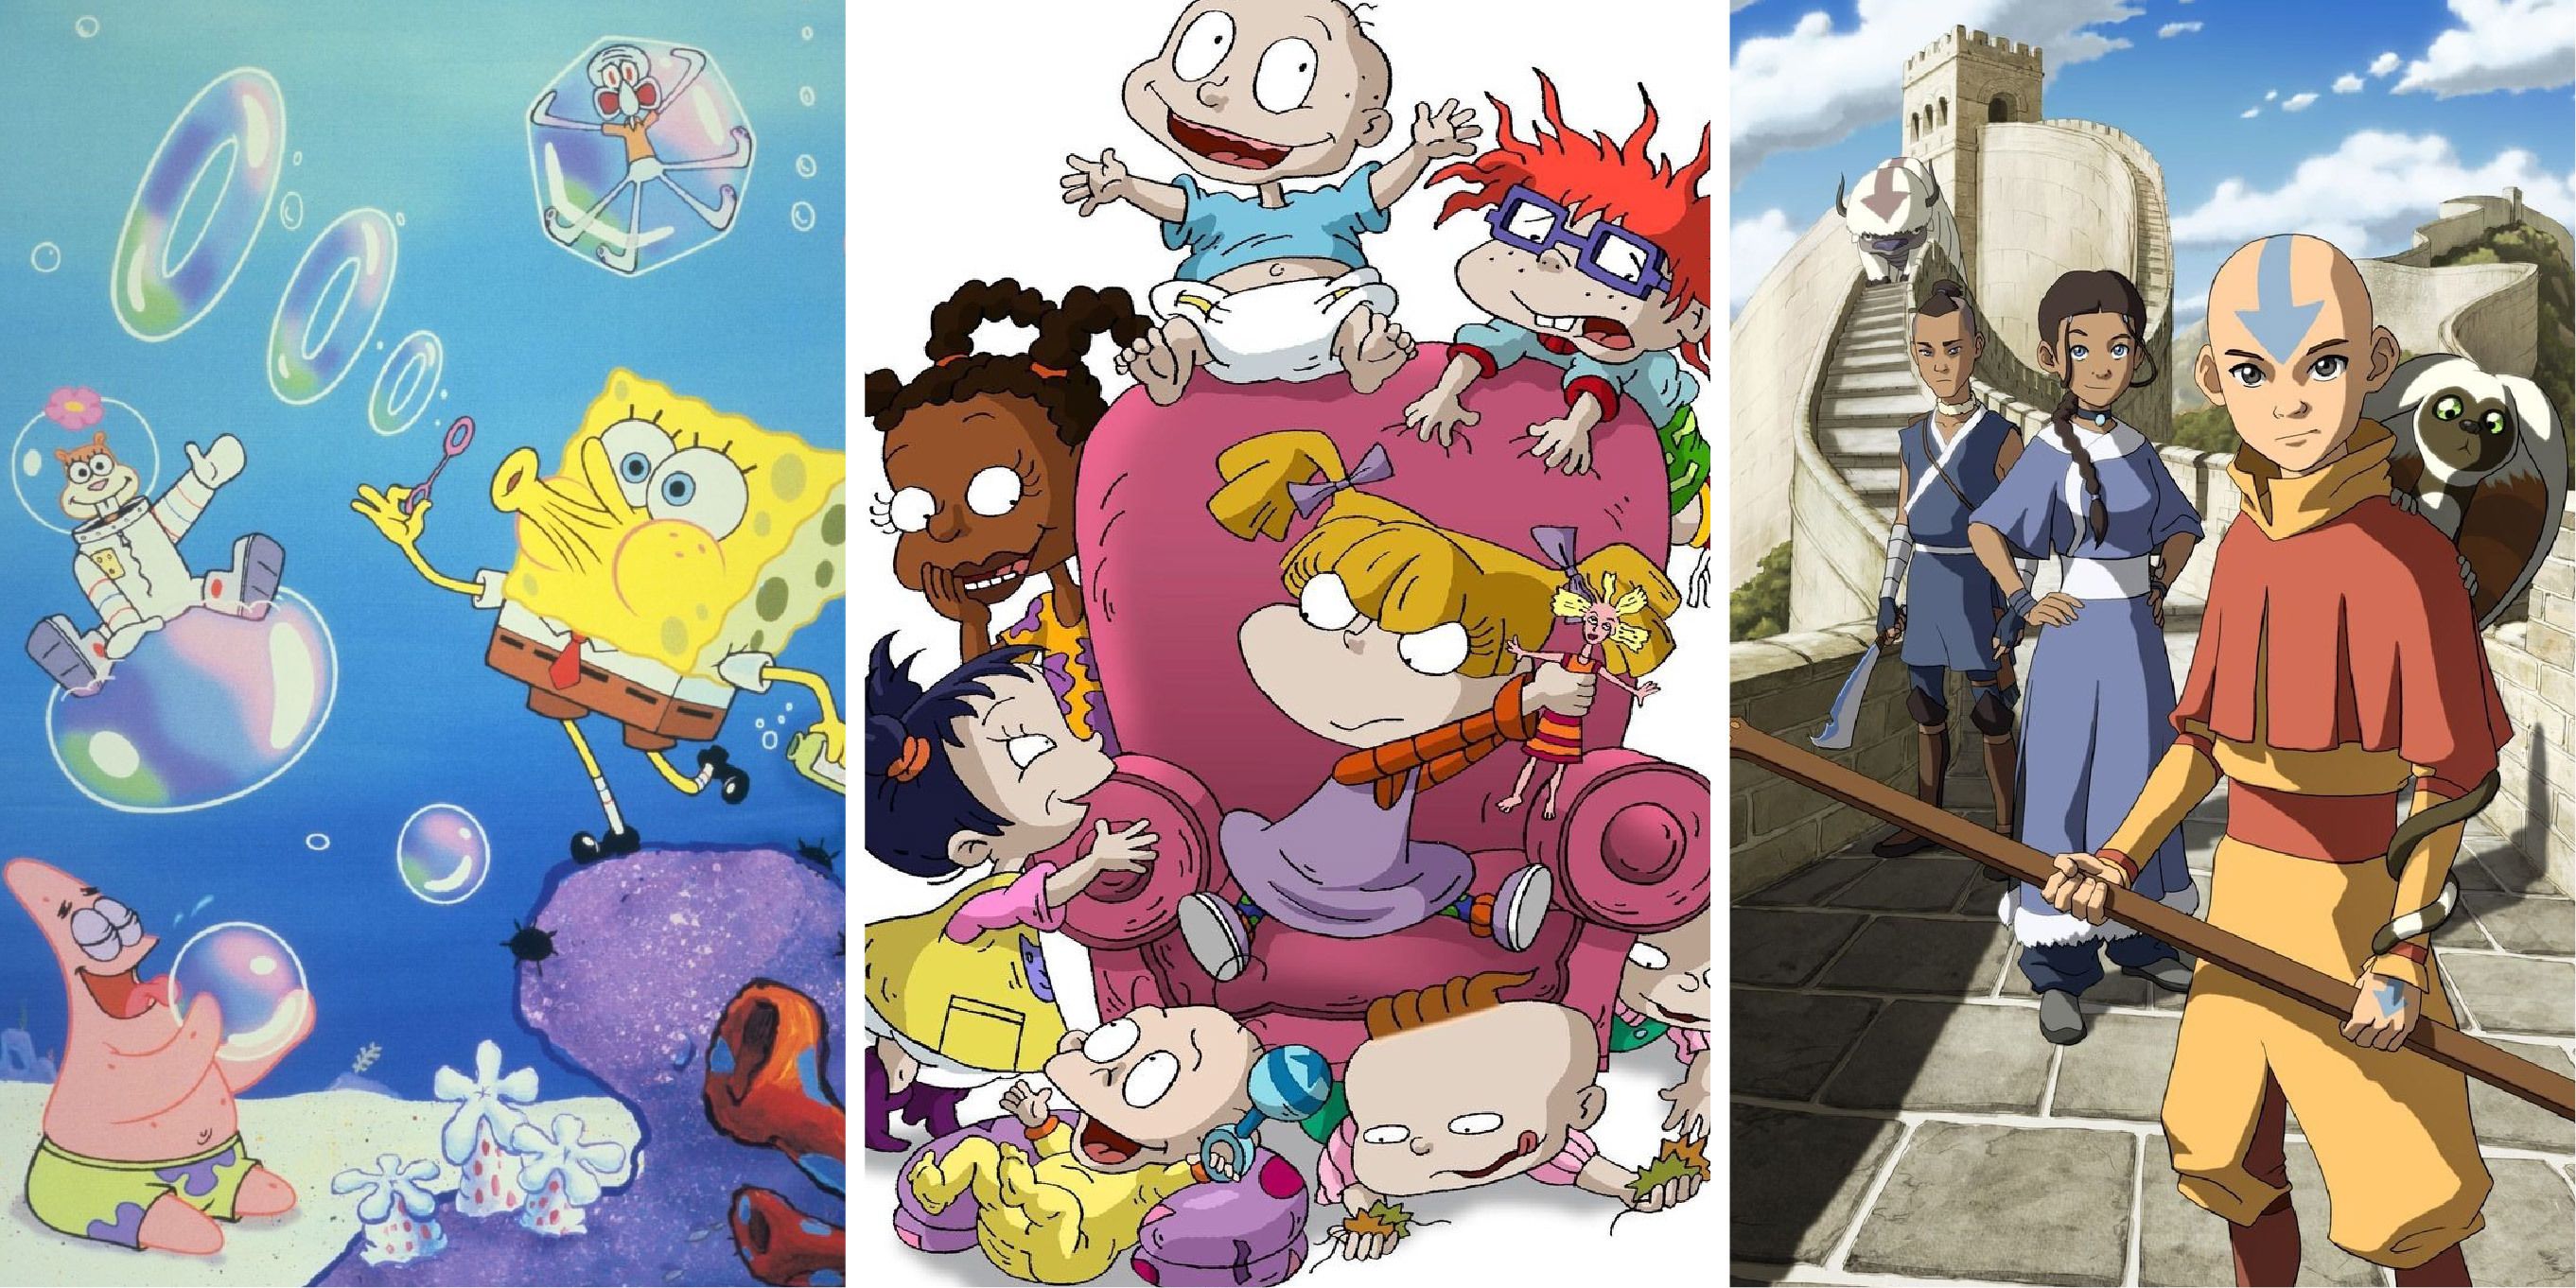 Cartoon Network Nostalgia: Top Classic Shows From The 90s and 00s